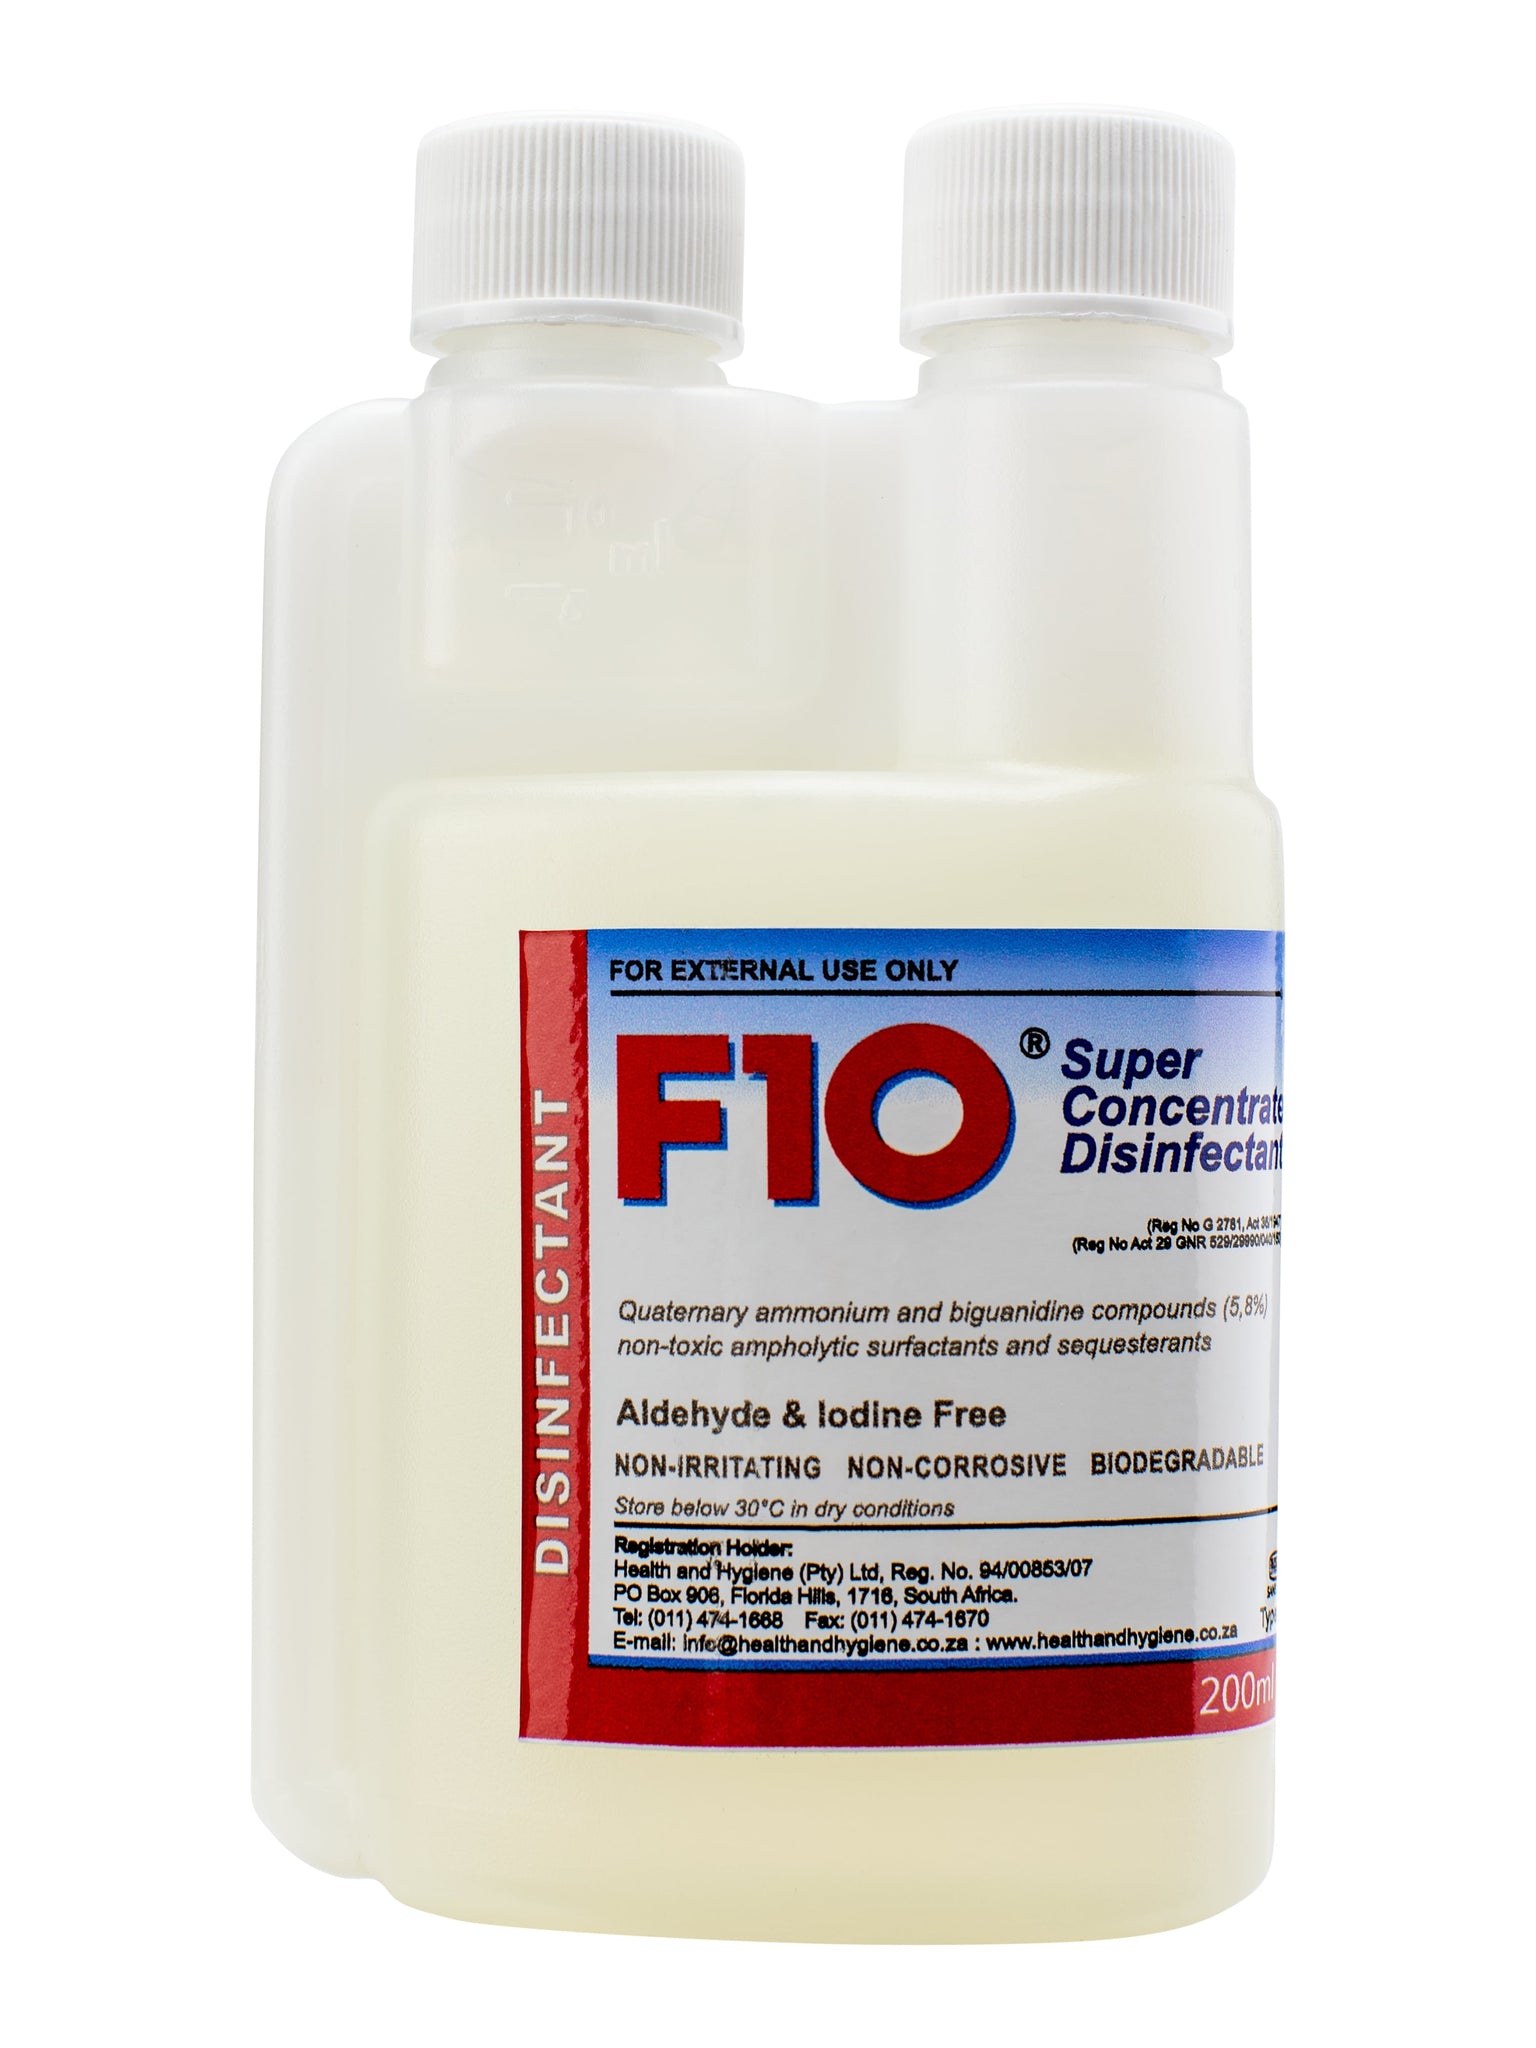 F10 Super Concentrate Disinfectant 200ml (F10SC)